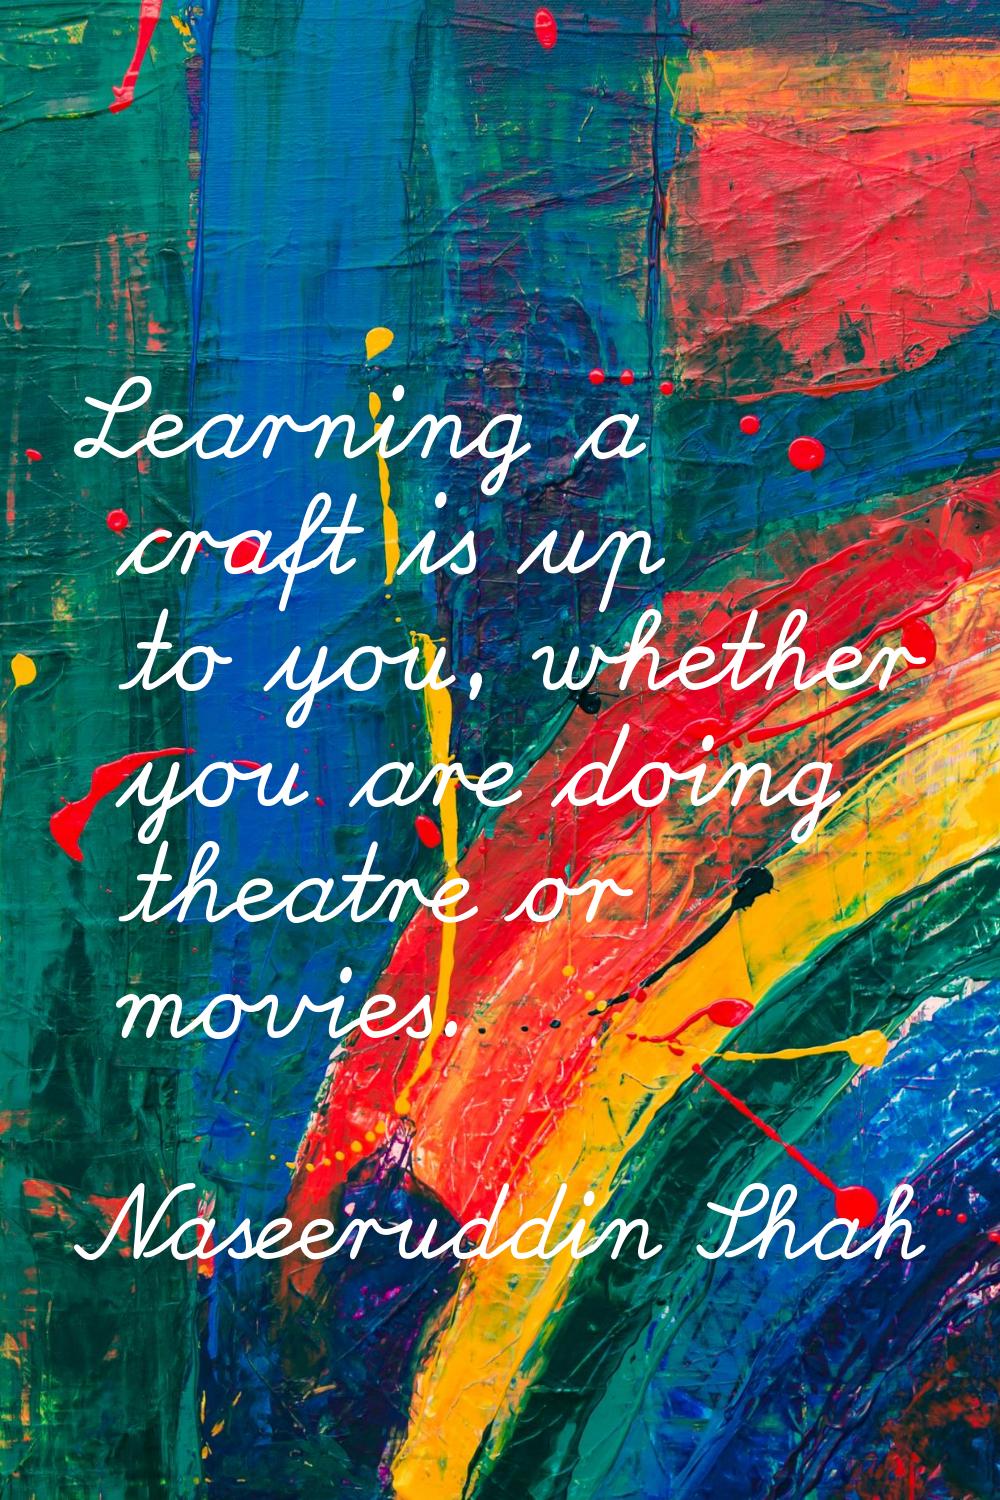 Learning a craft is up to you, whether you are doing theatre or movies.